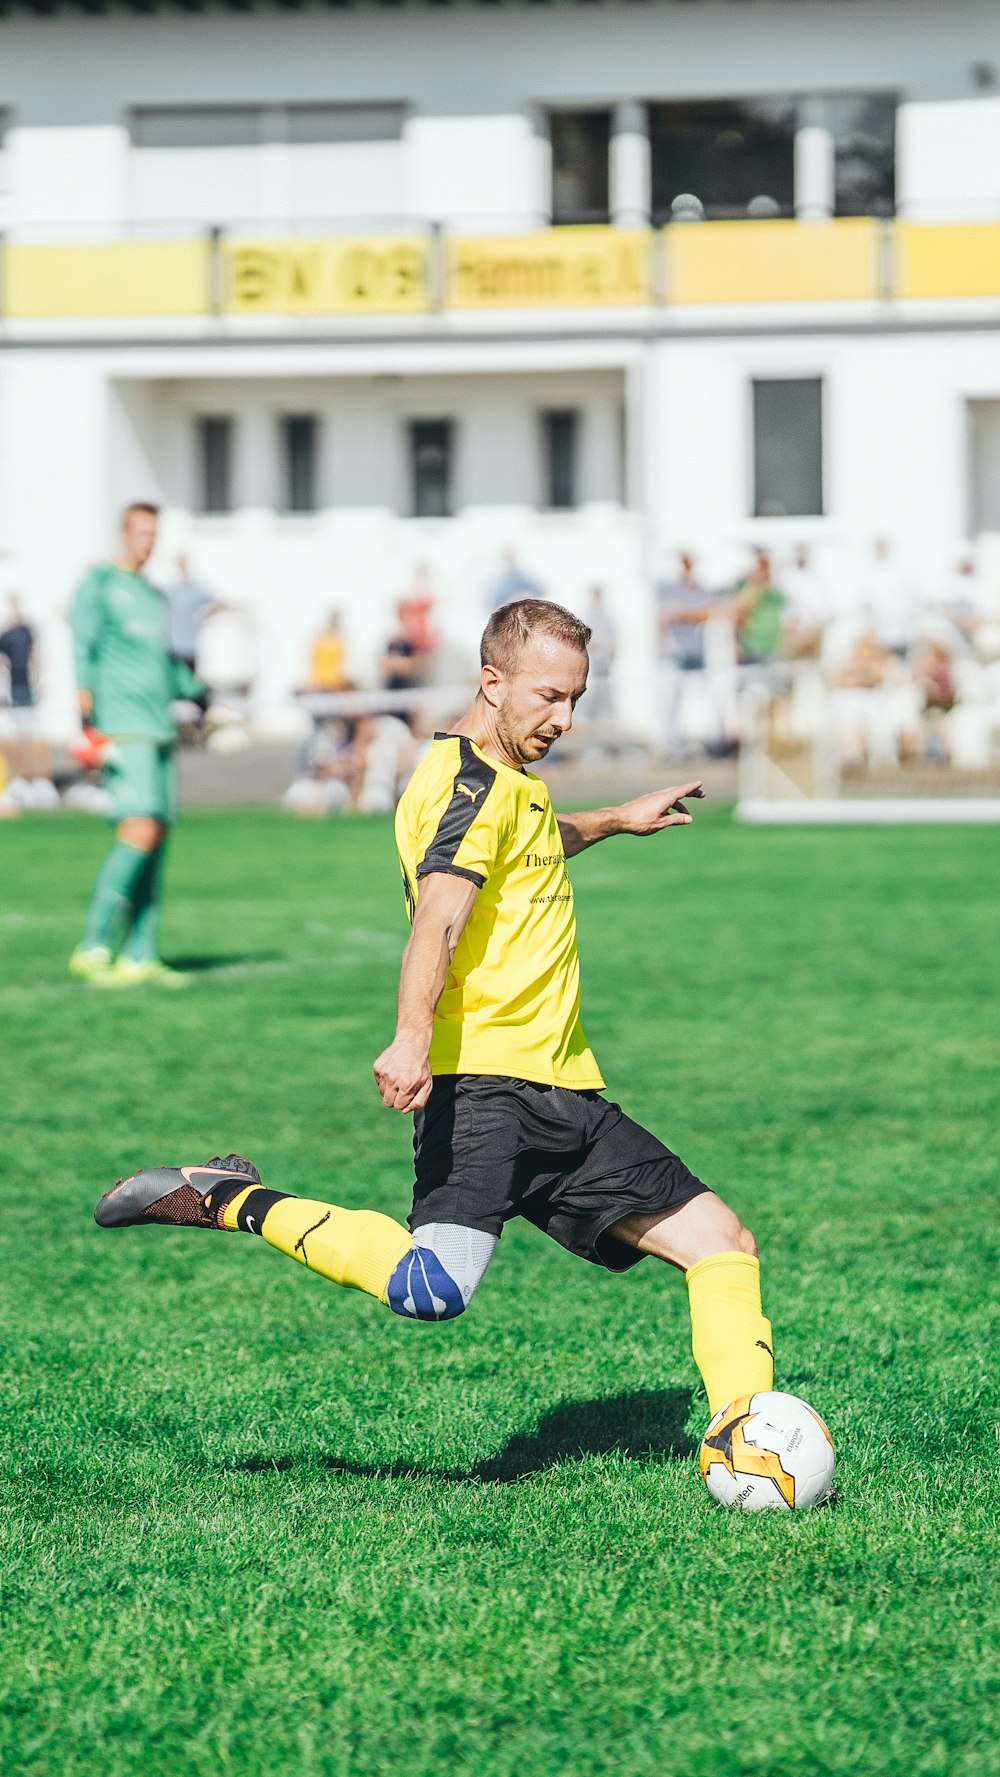 boy in yellow and black soccer jersey kicking soccer ball on green grass field during daytime